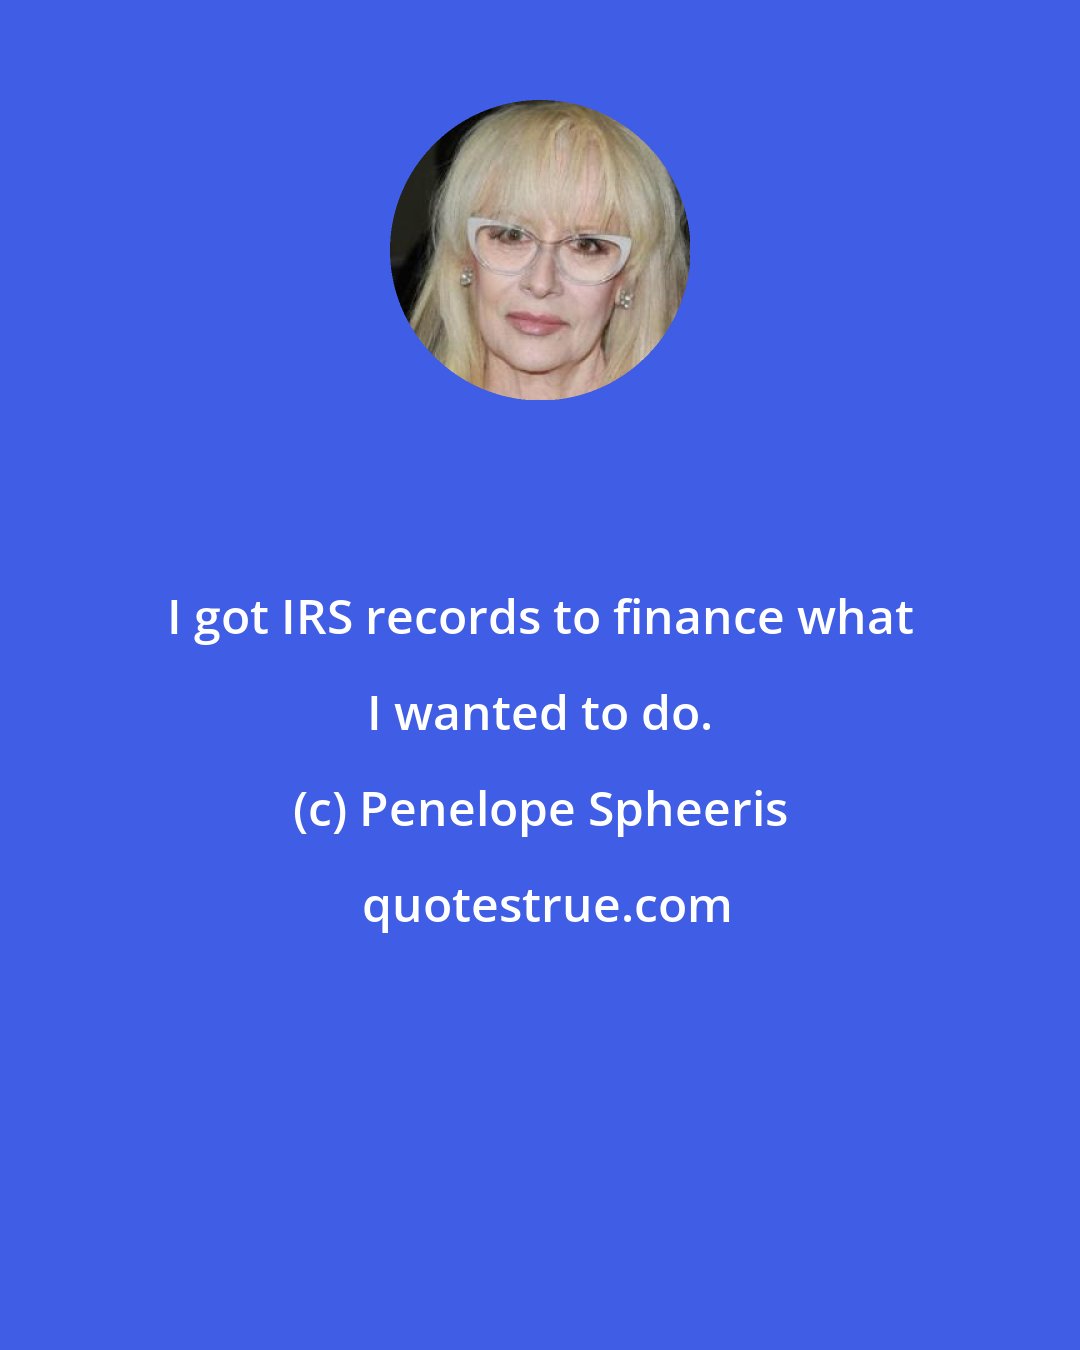 Penelope Spheeris: I got IRS records to finance what I wanted to do.